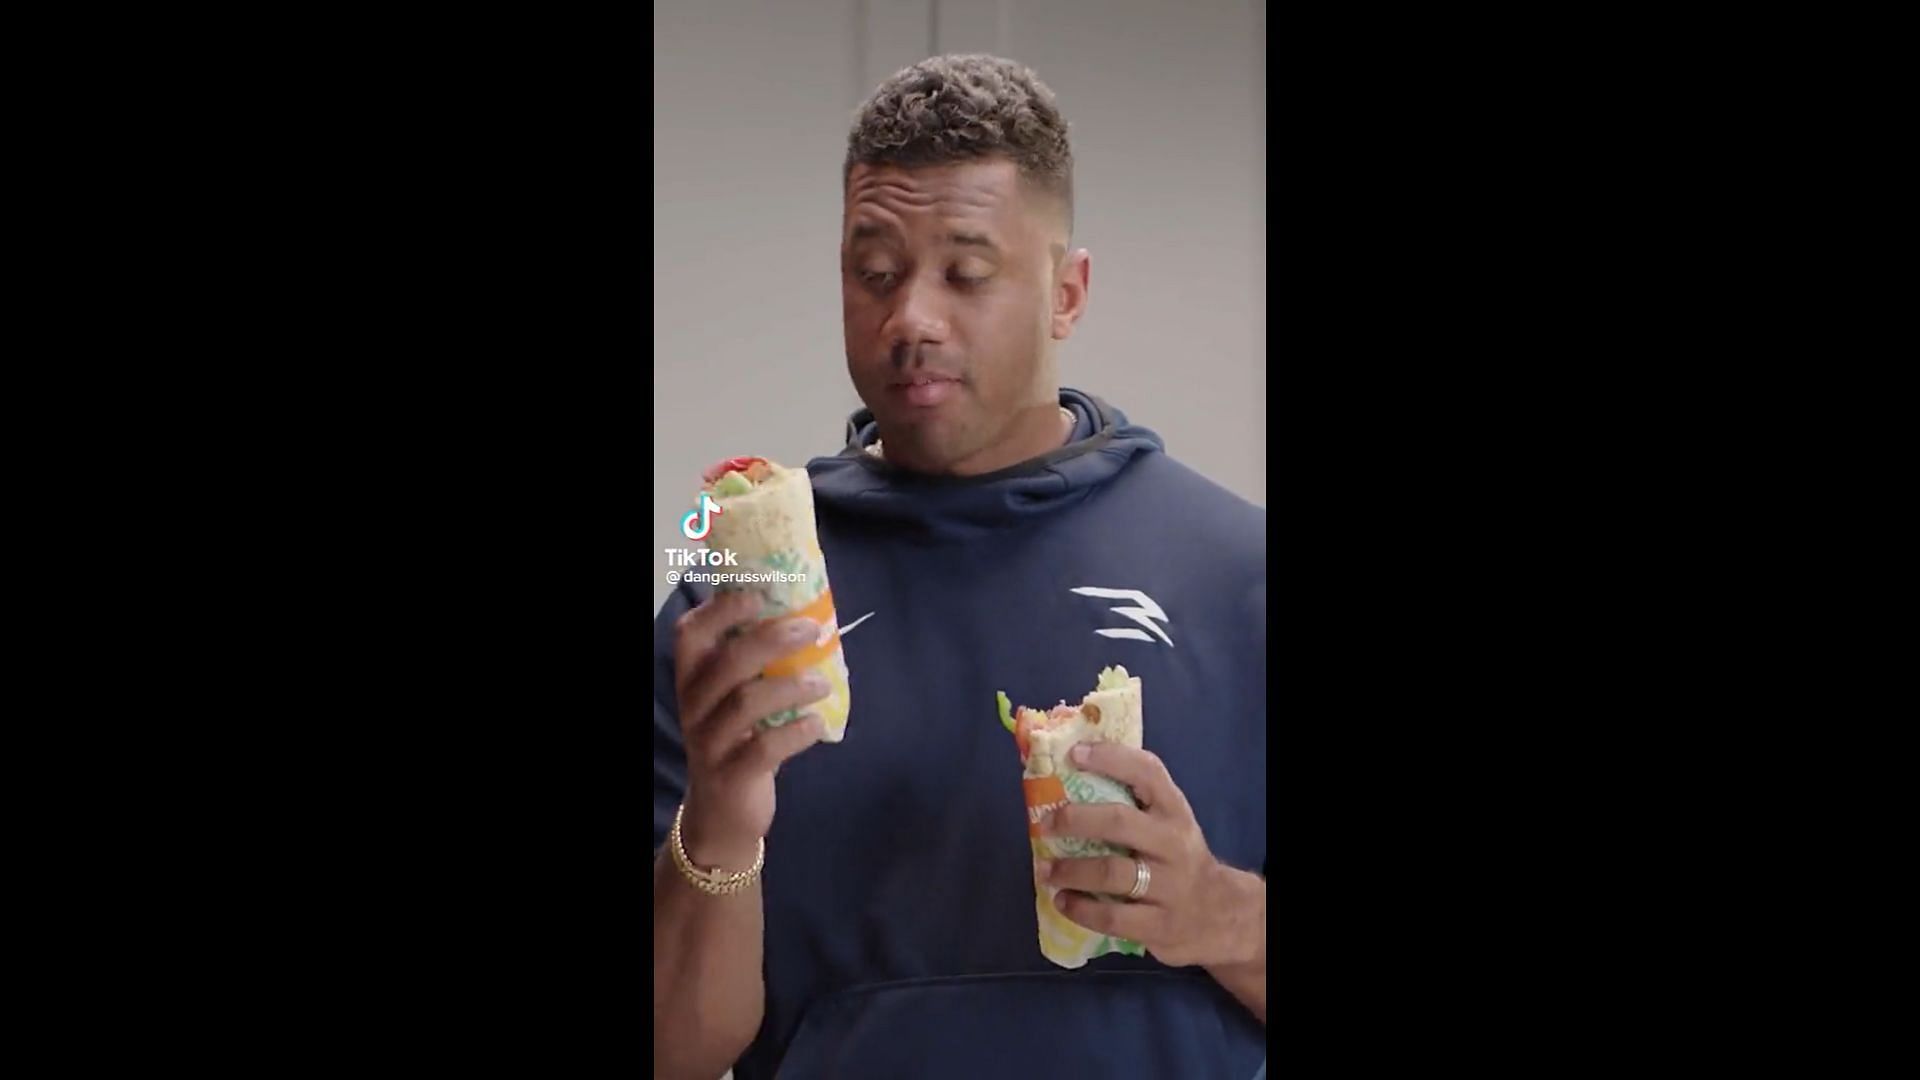 Wilson during his subway commercial. Phot via Russell Wilson/TikTok